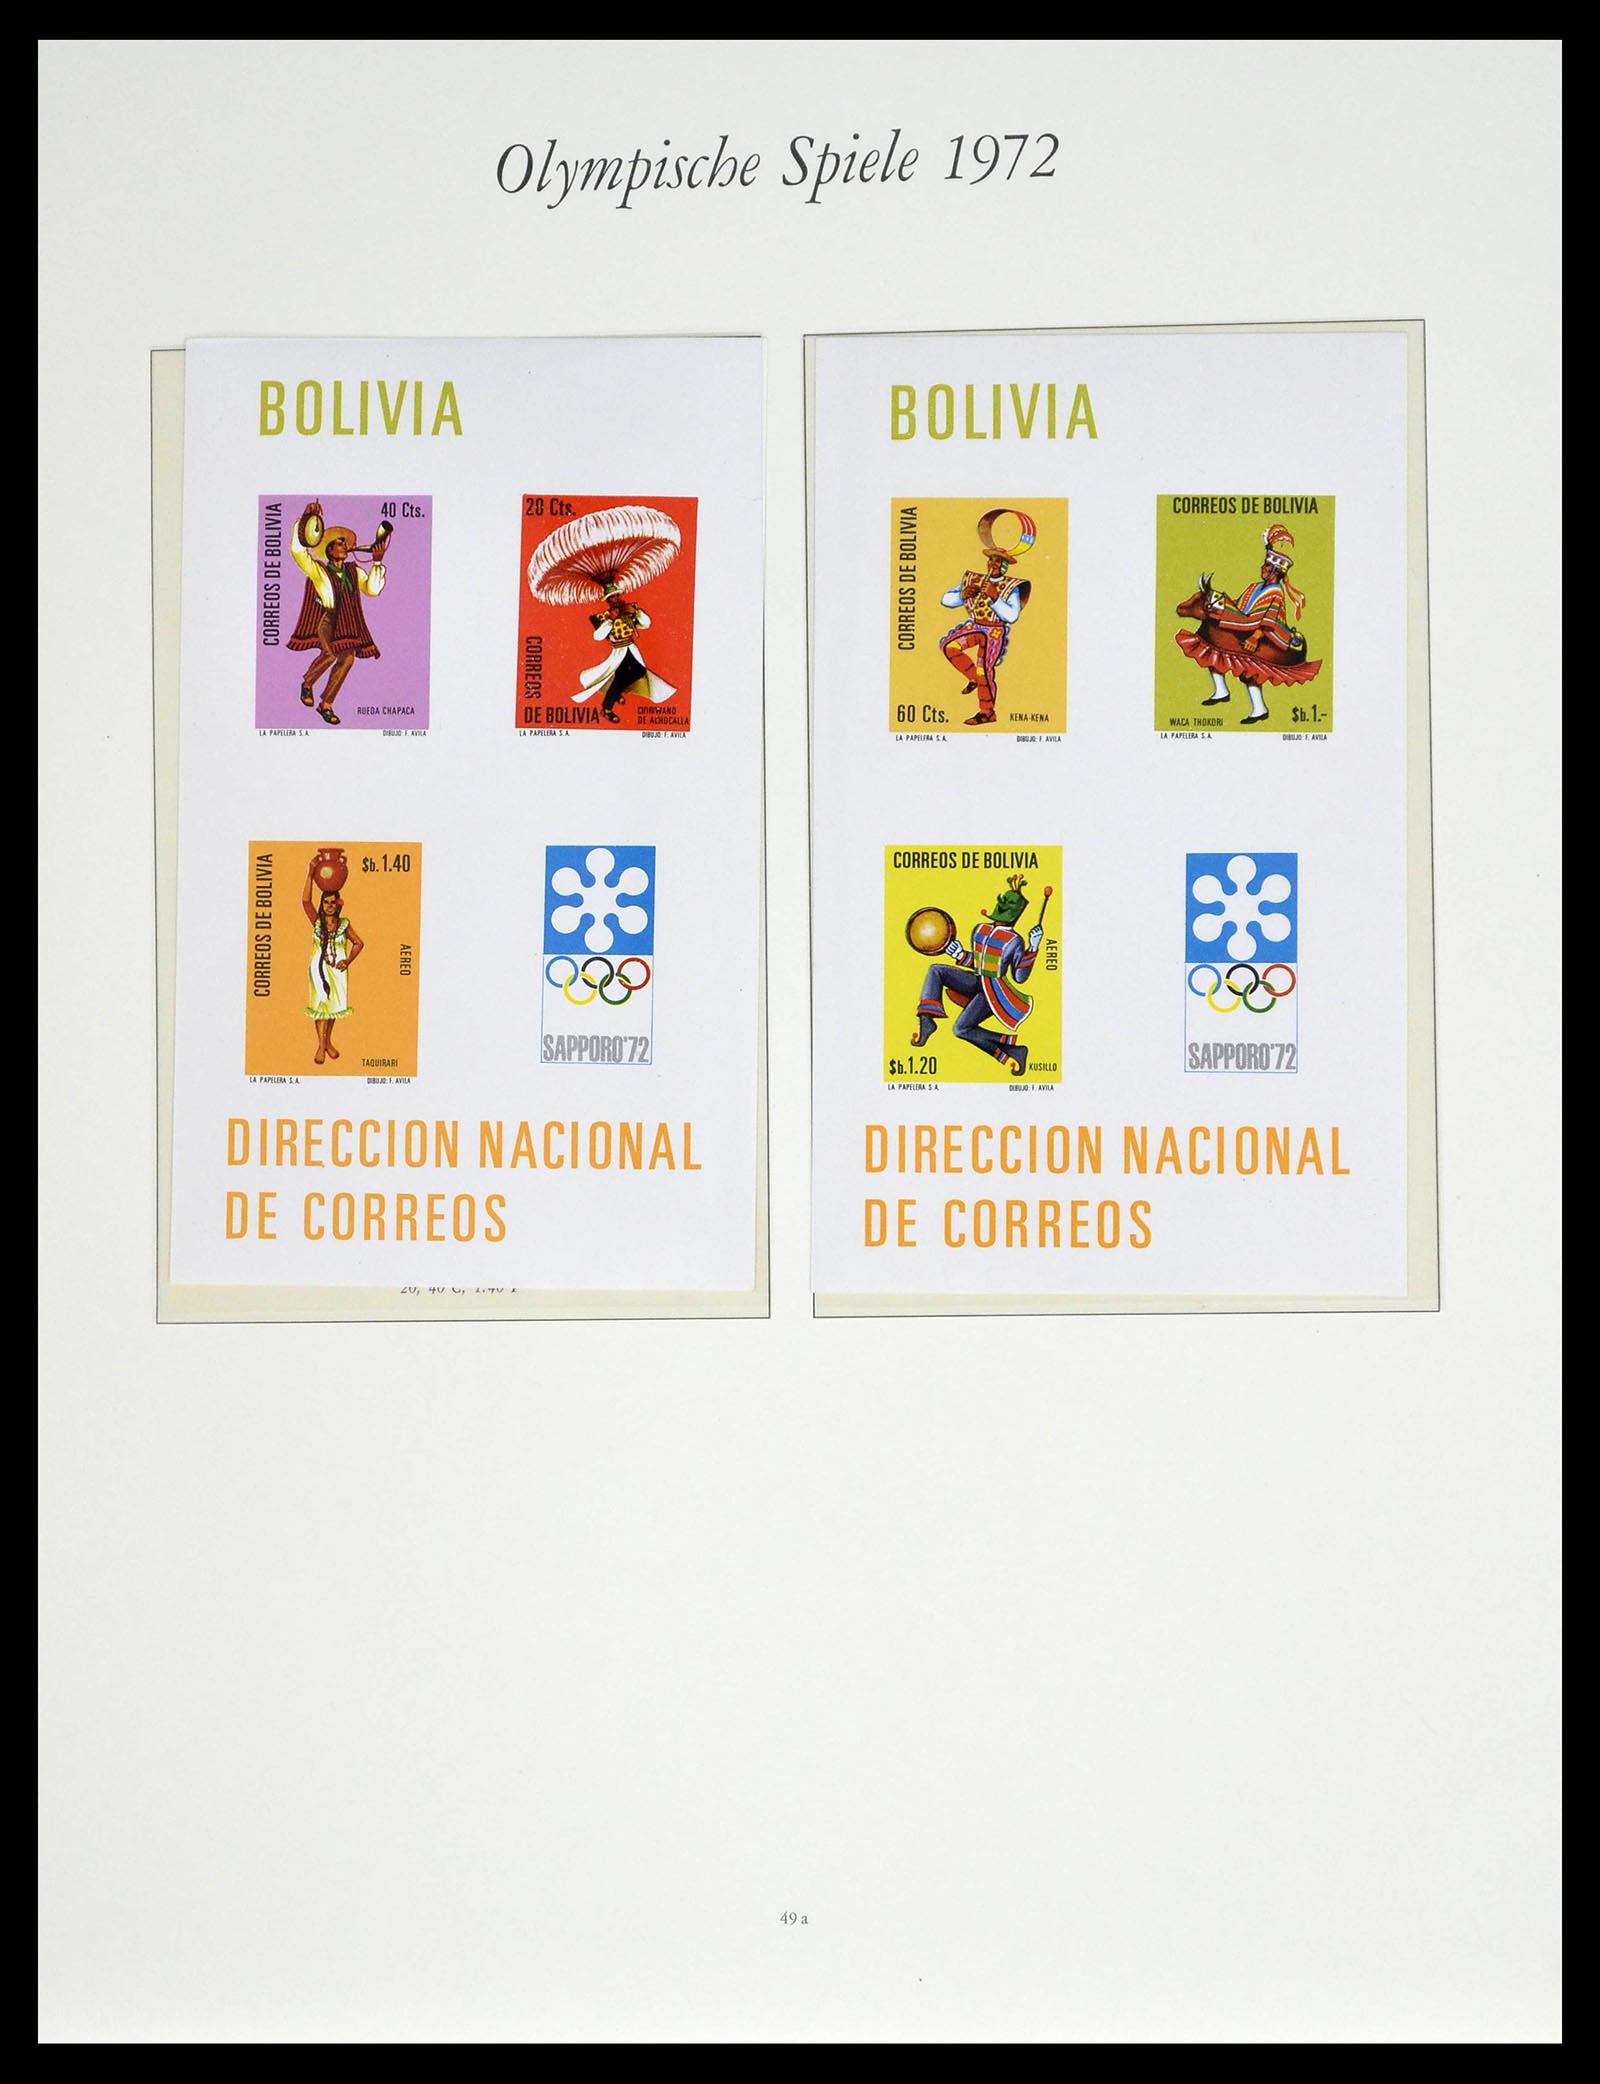 39237 0104 - Stamp collection 39237 Olympics 1972.